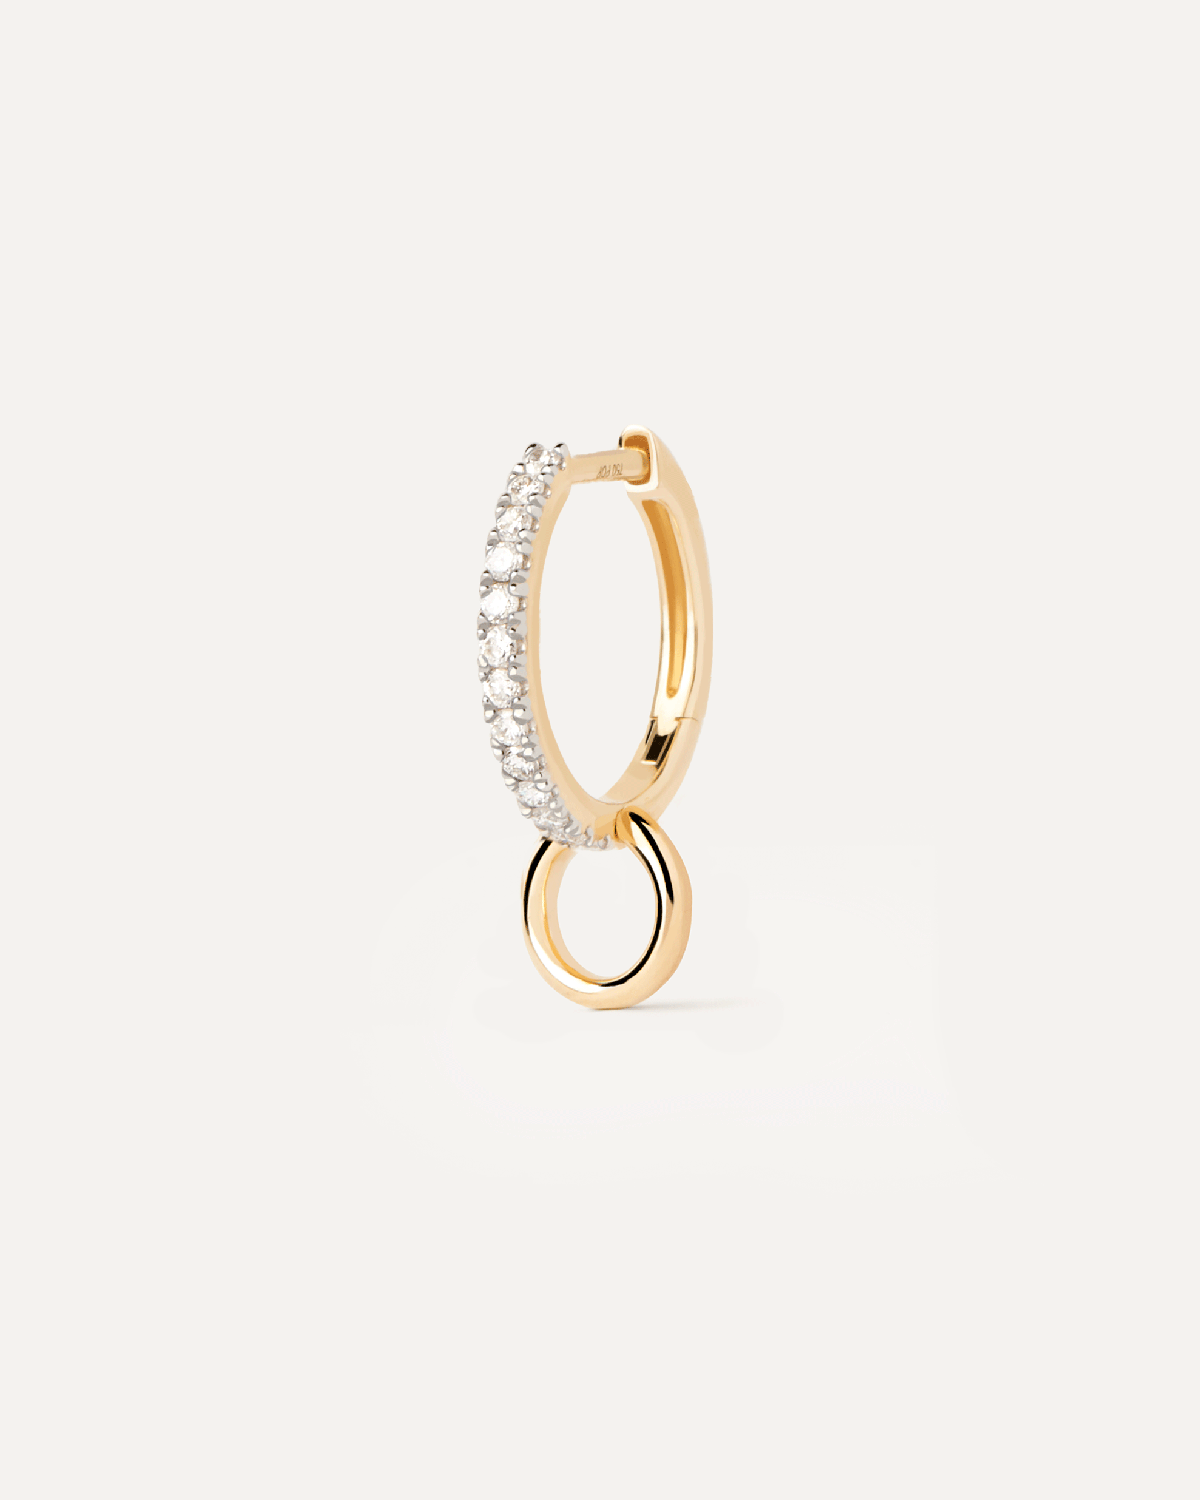 Diamonds and gold Circle single hoop. Sleek single hoop in solid yellow gold and lab-grown diamonds with a swinging circular pendant. Get the latest arrival from PDPAOLA. Place your order safely and get this Best Seller.